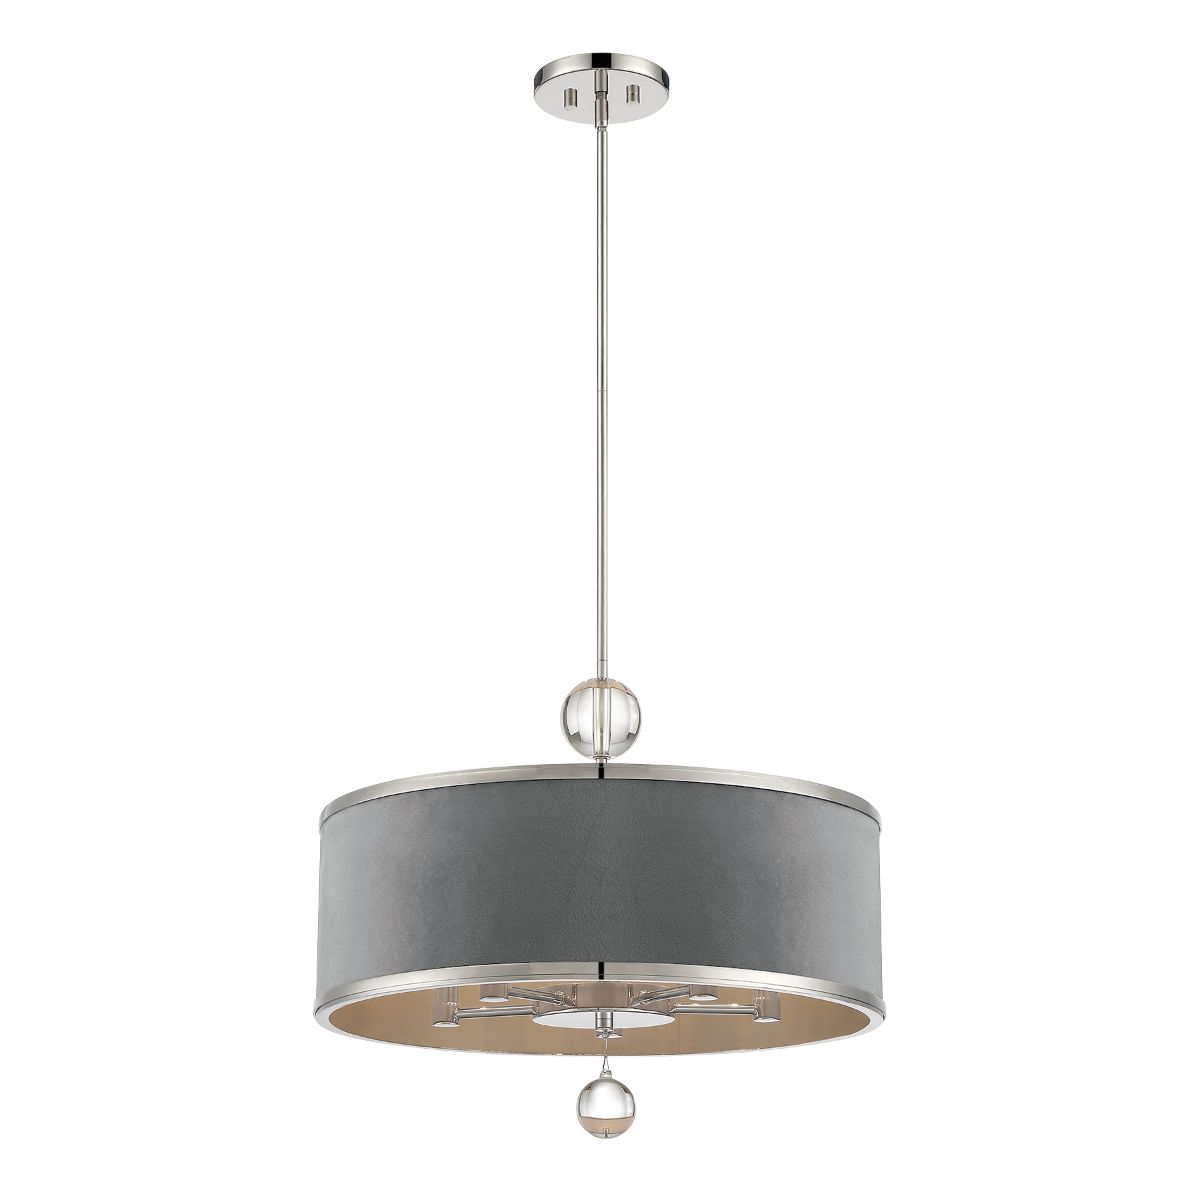 Luxour 20 in. 5 lights Pendant Light Polished Nickel Finish